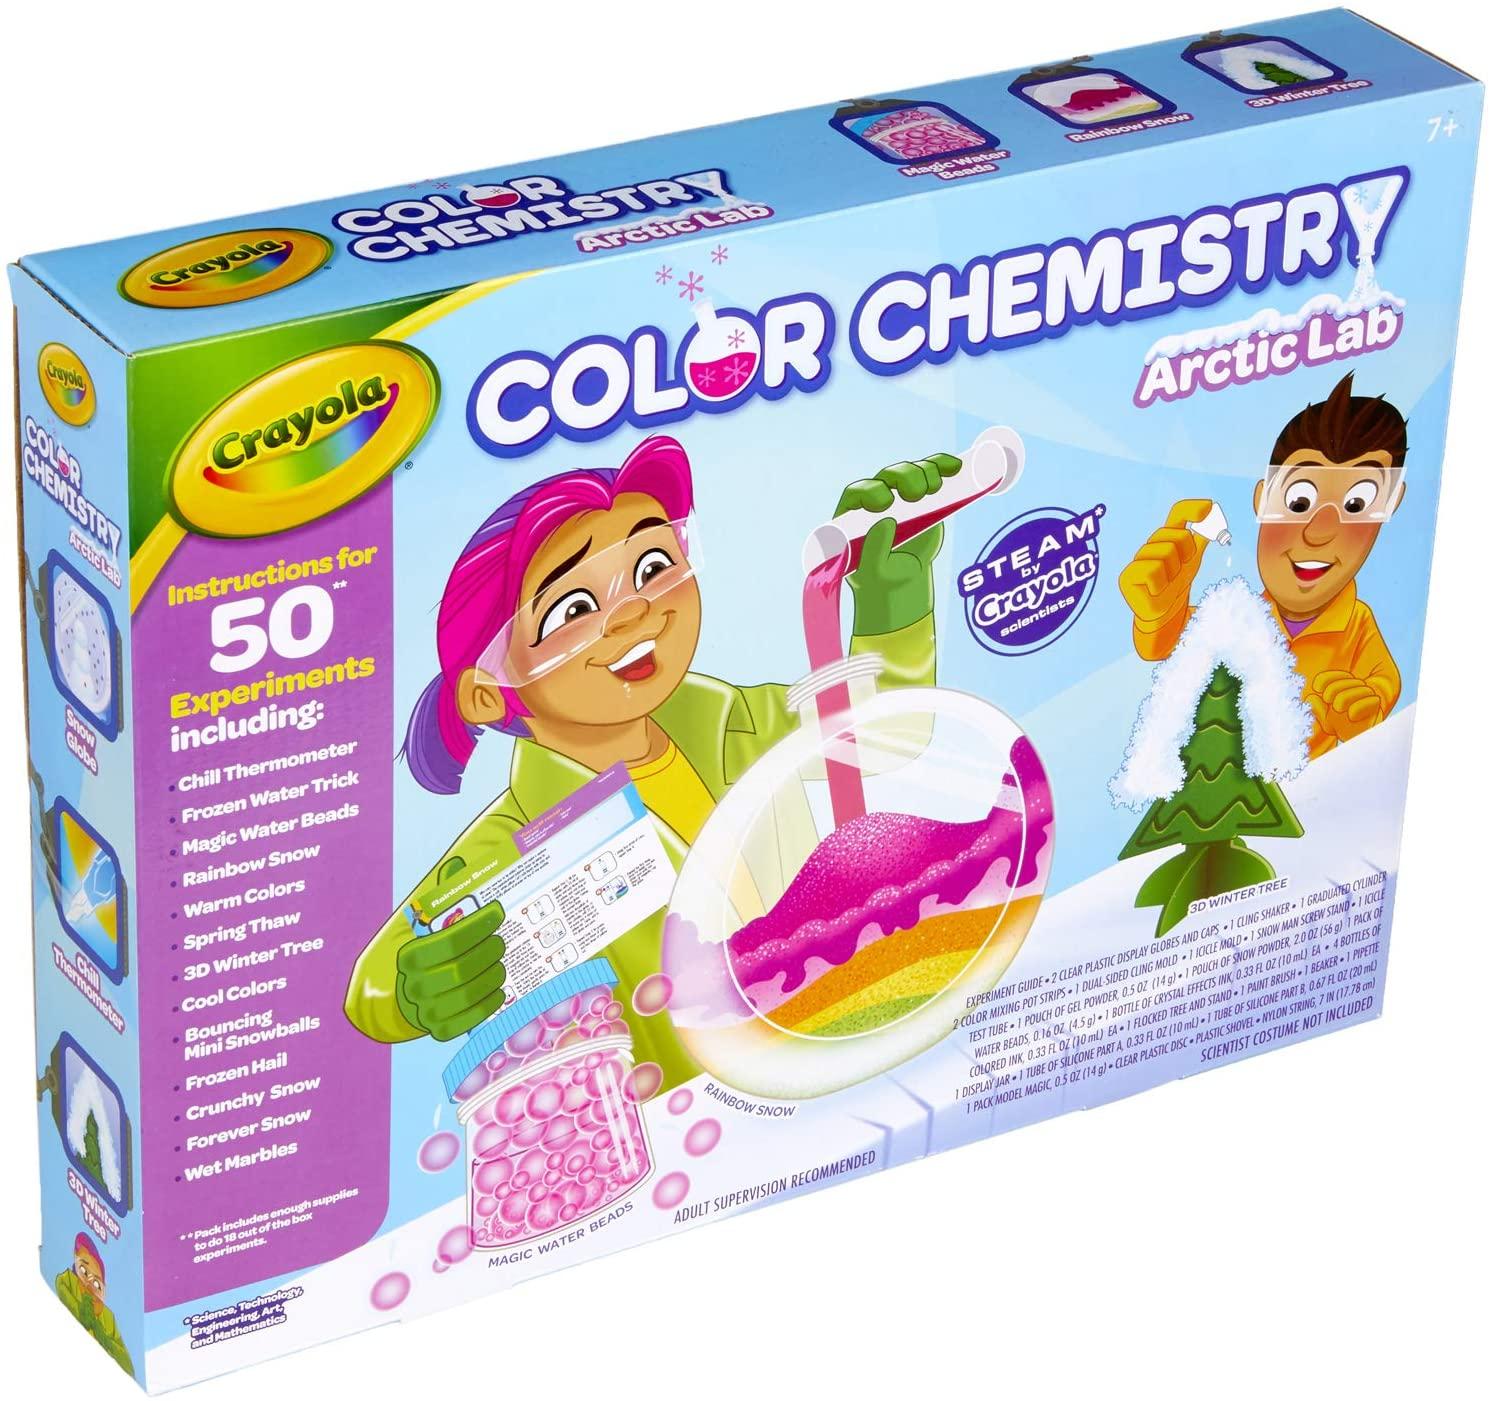 Crayola Arctic Color Chemistry Set for $13.08